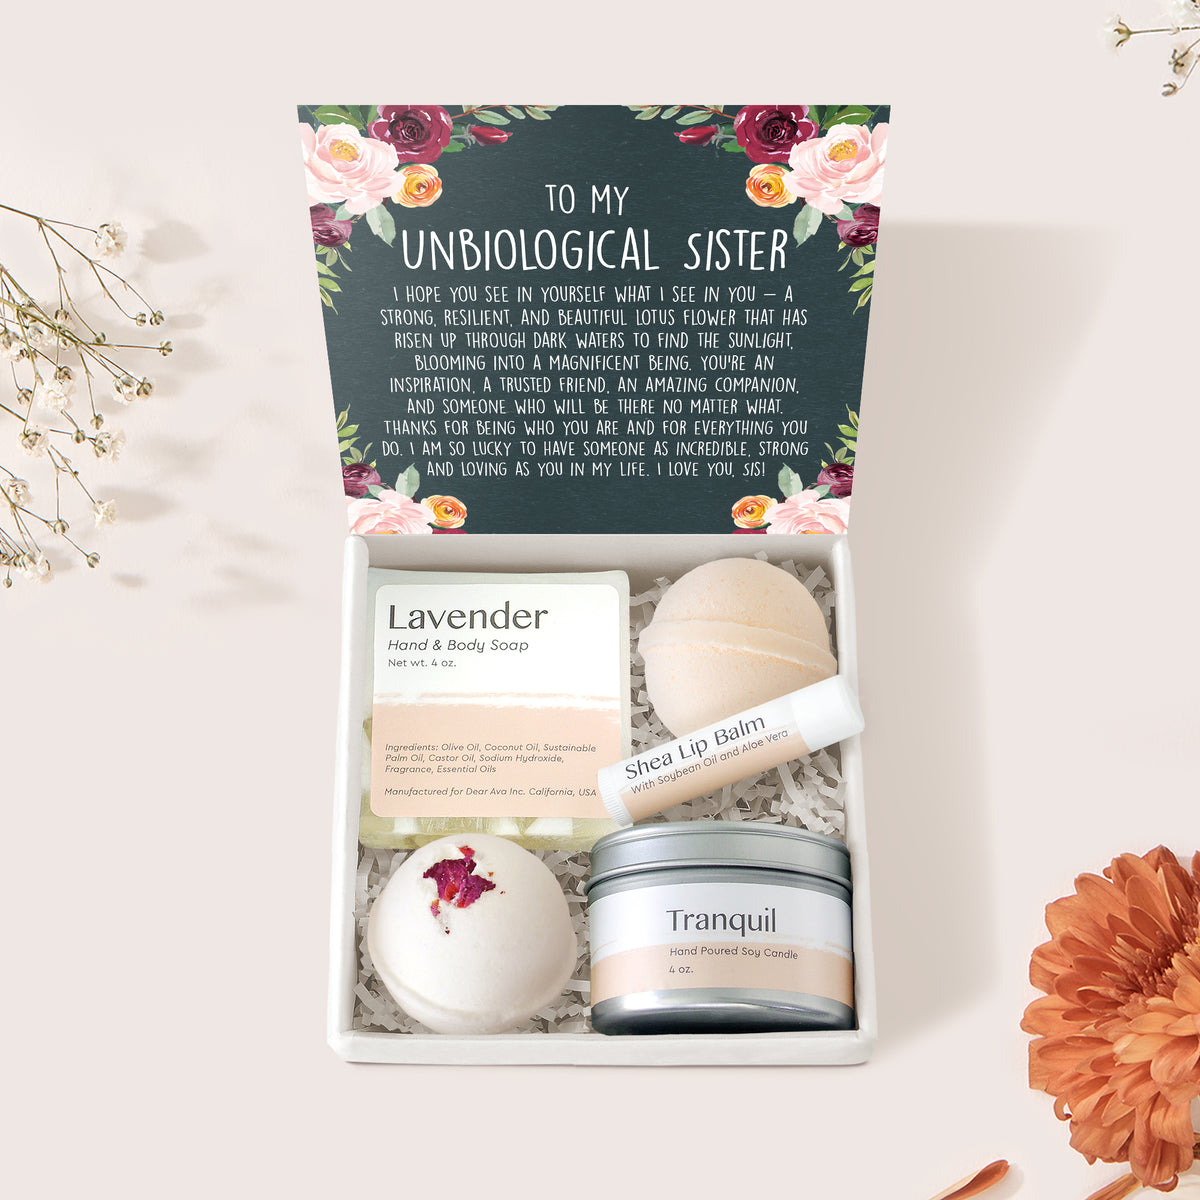 Unbiological Sisters Spa Gift Box Set